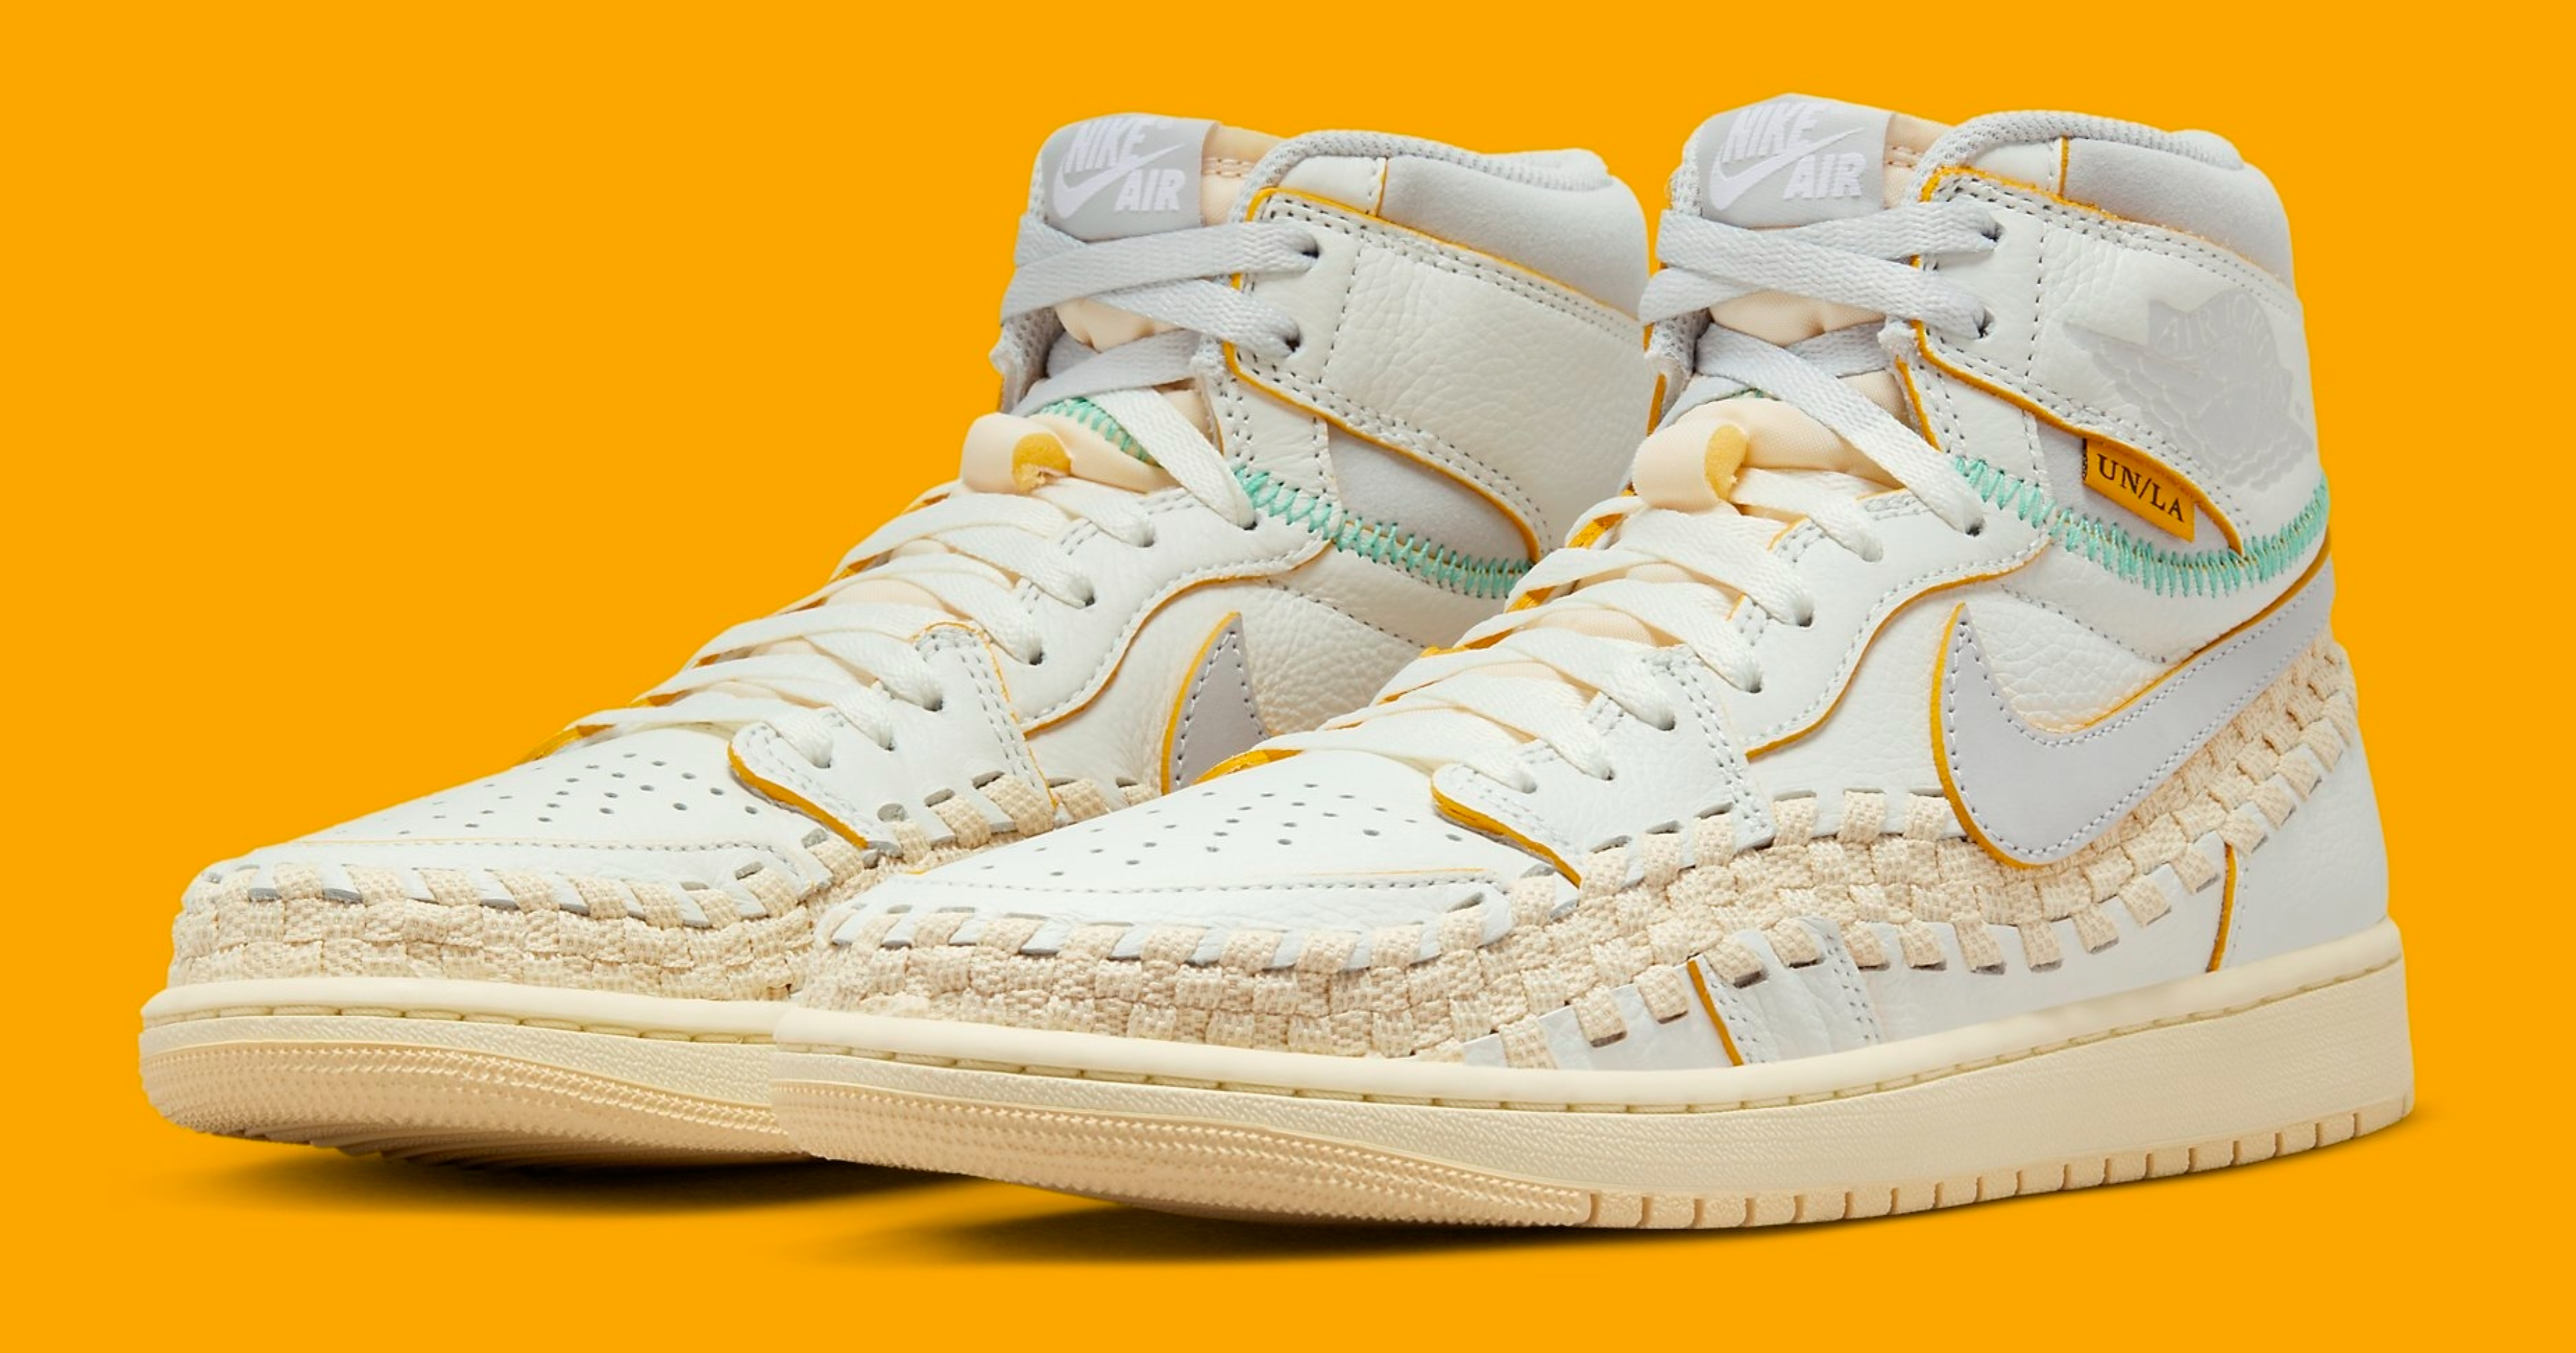 Union x Bephies Beauty Supply x Air Jordan 1 Woven Collab Release